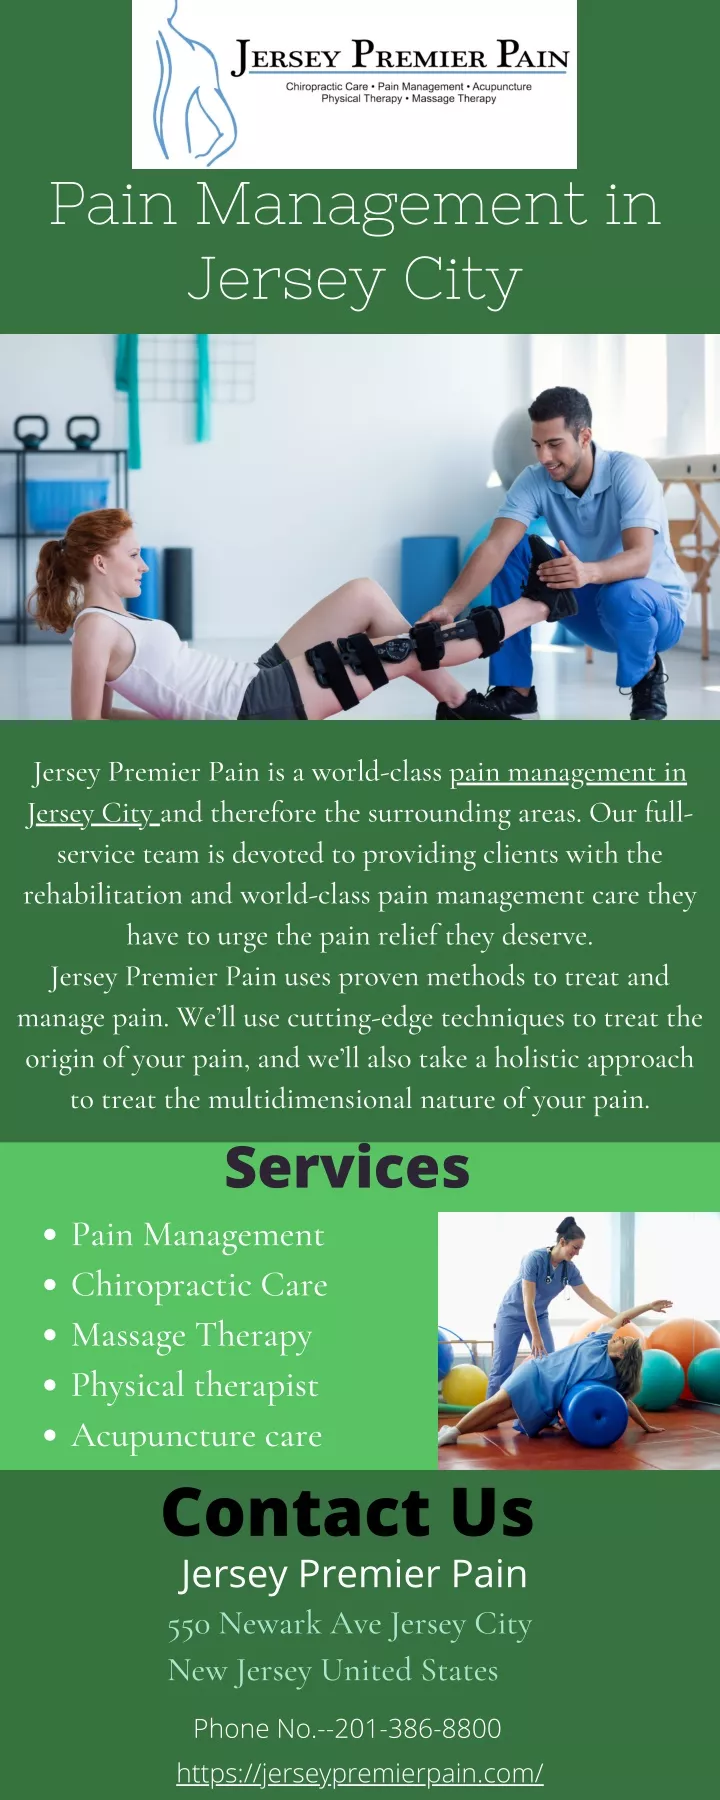 pain management in jersey city